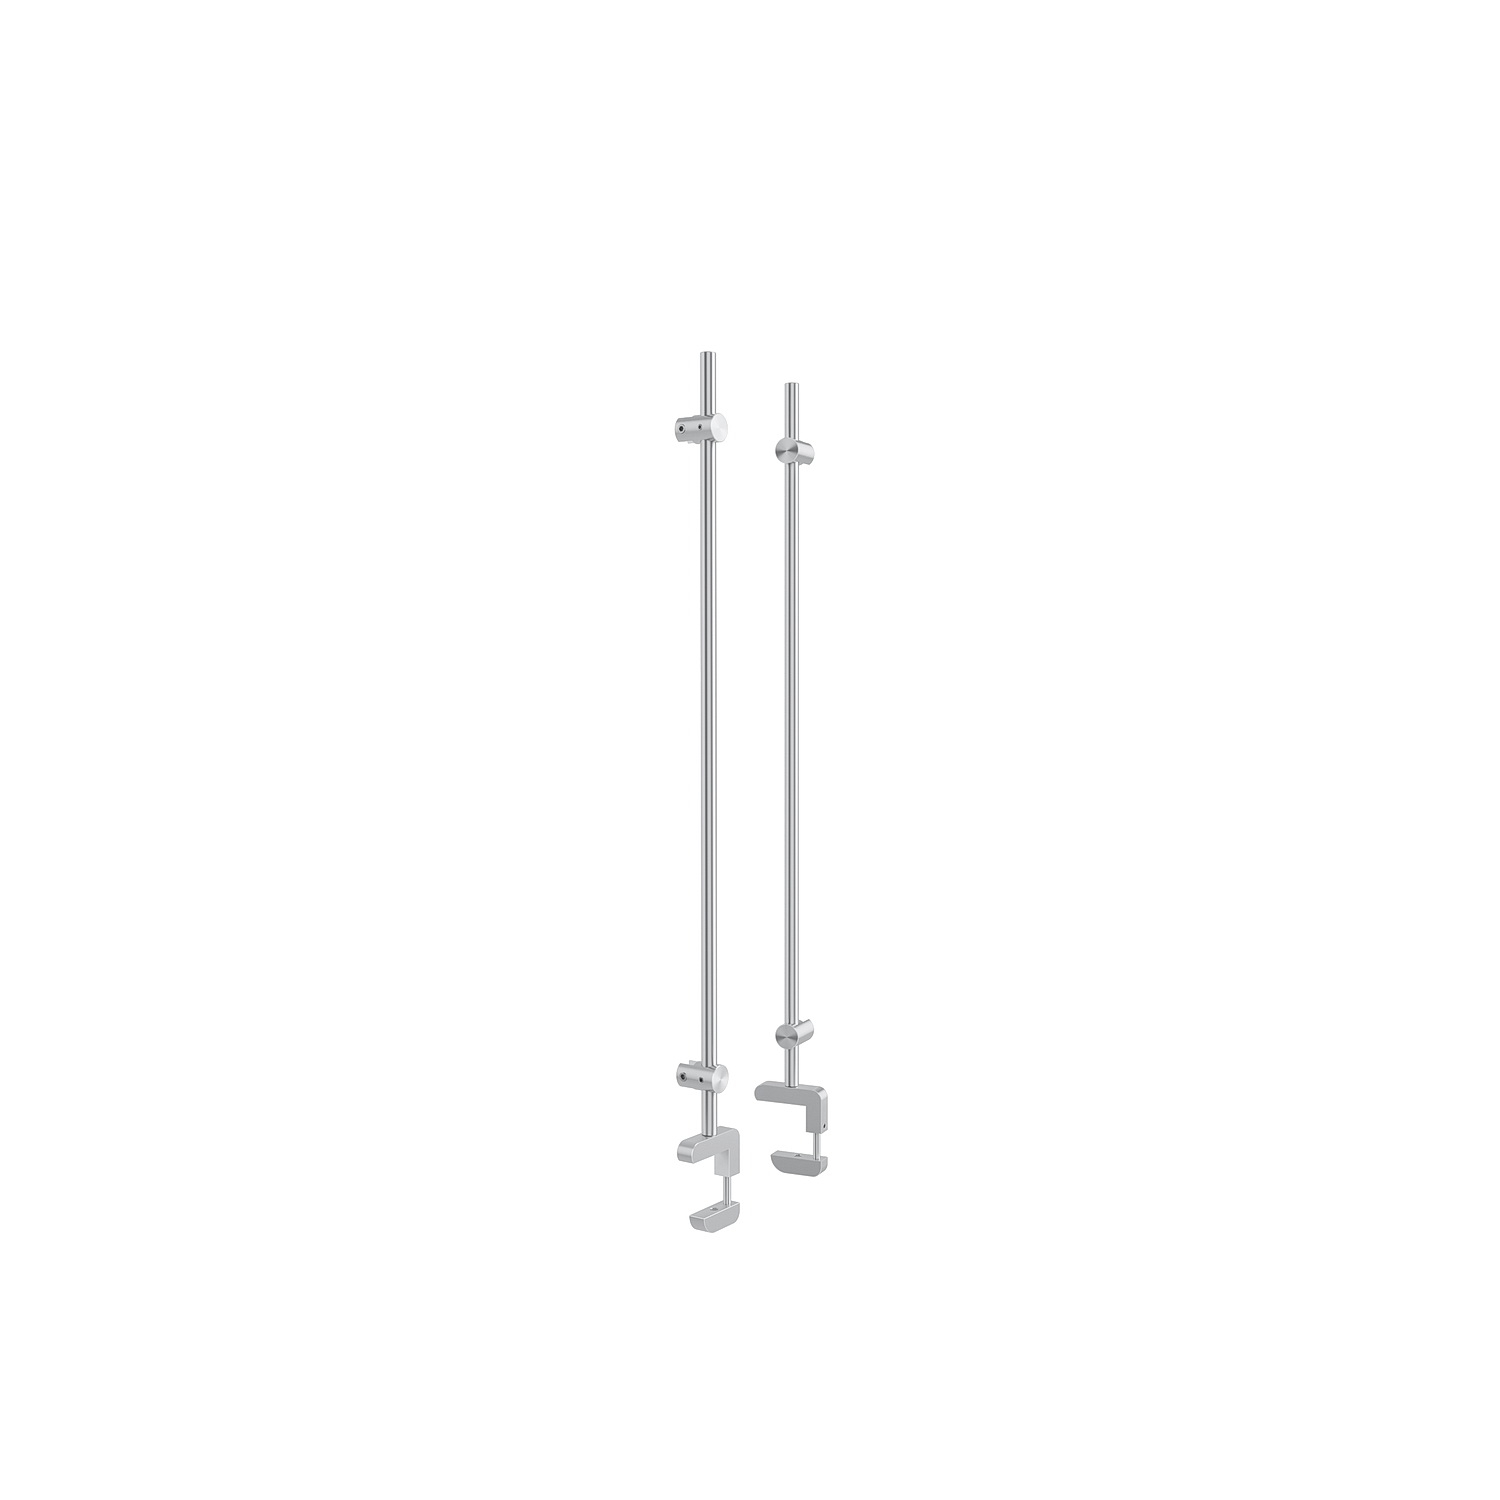 Set of 2, 3/8'' Diameter Vertical Rod Mount, Aluminum Clear Anodized Finish, 20'' Long w/ Adjustable Clamp to Accomodate 3/4'' to 1-1/2'' Counters. Hold up to 5/16'' material thickness